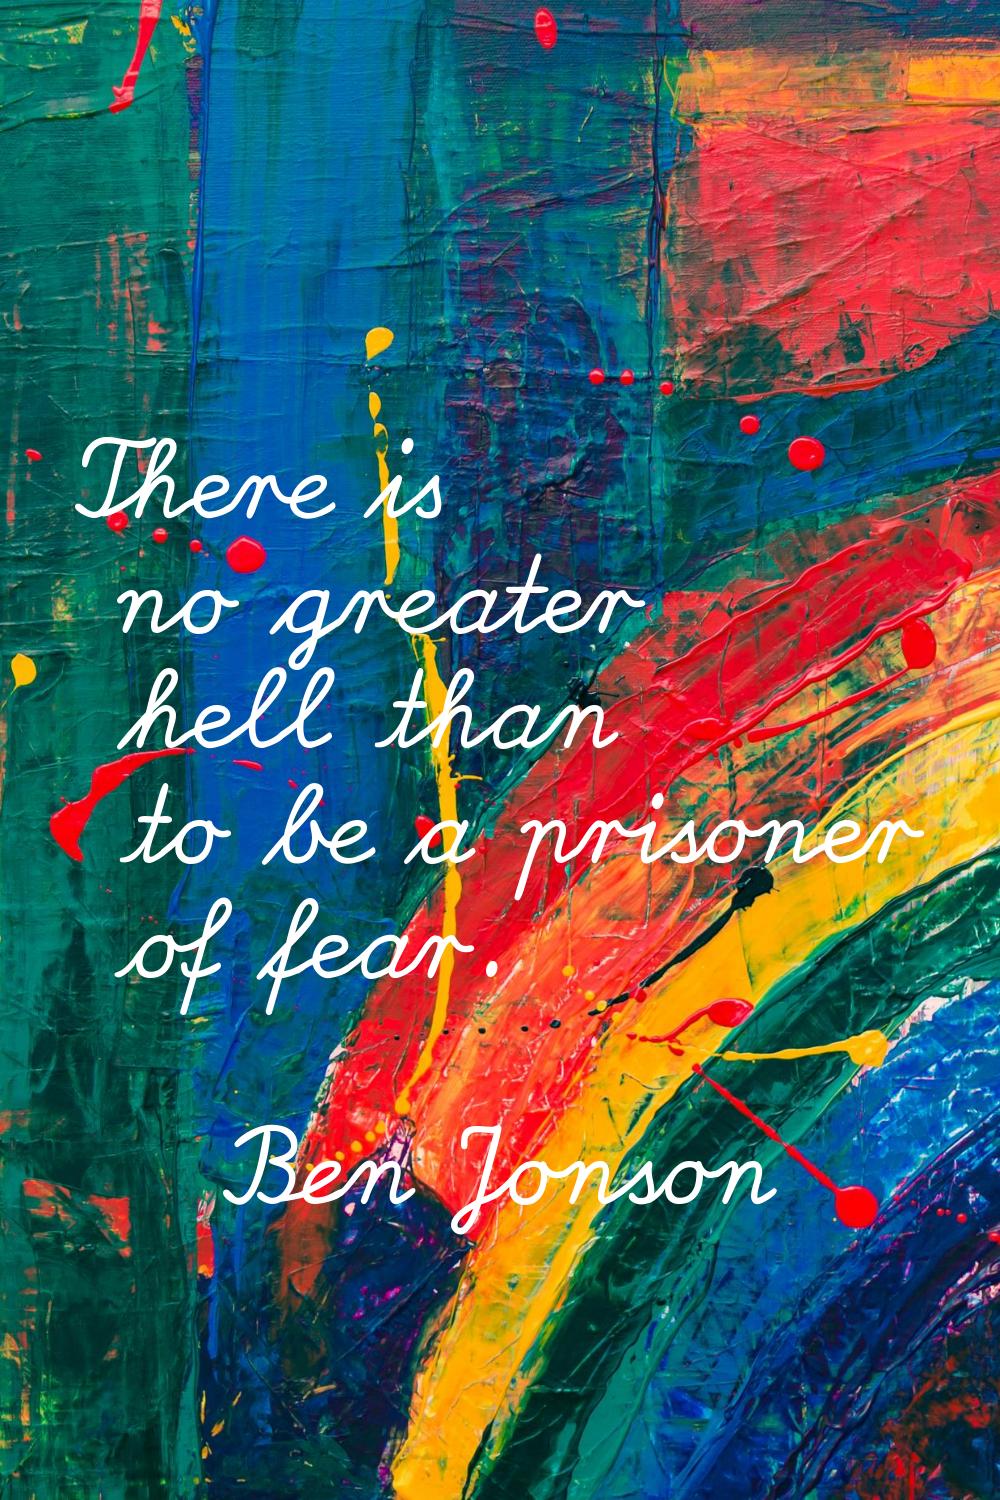 There is no greater hell than to be a prisoner of fear.